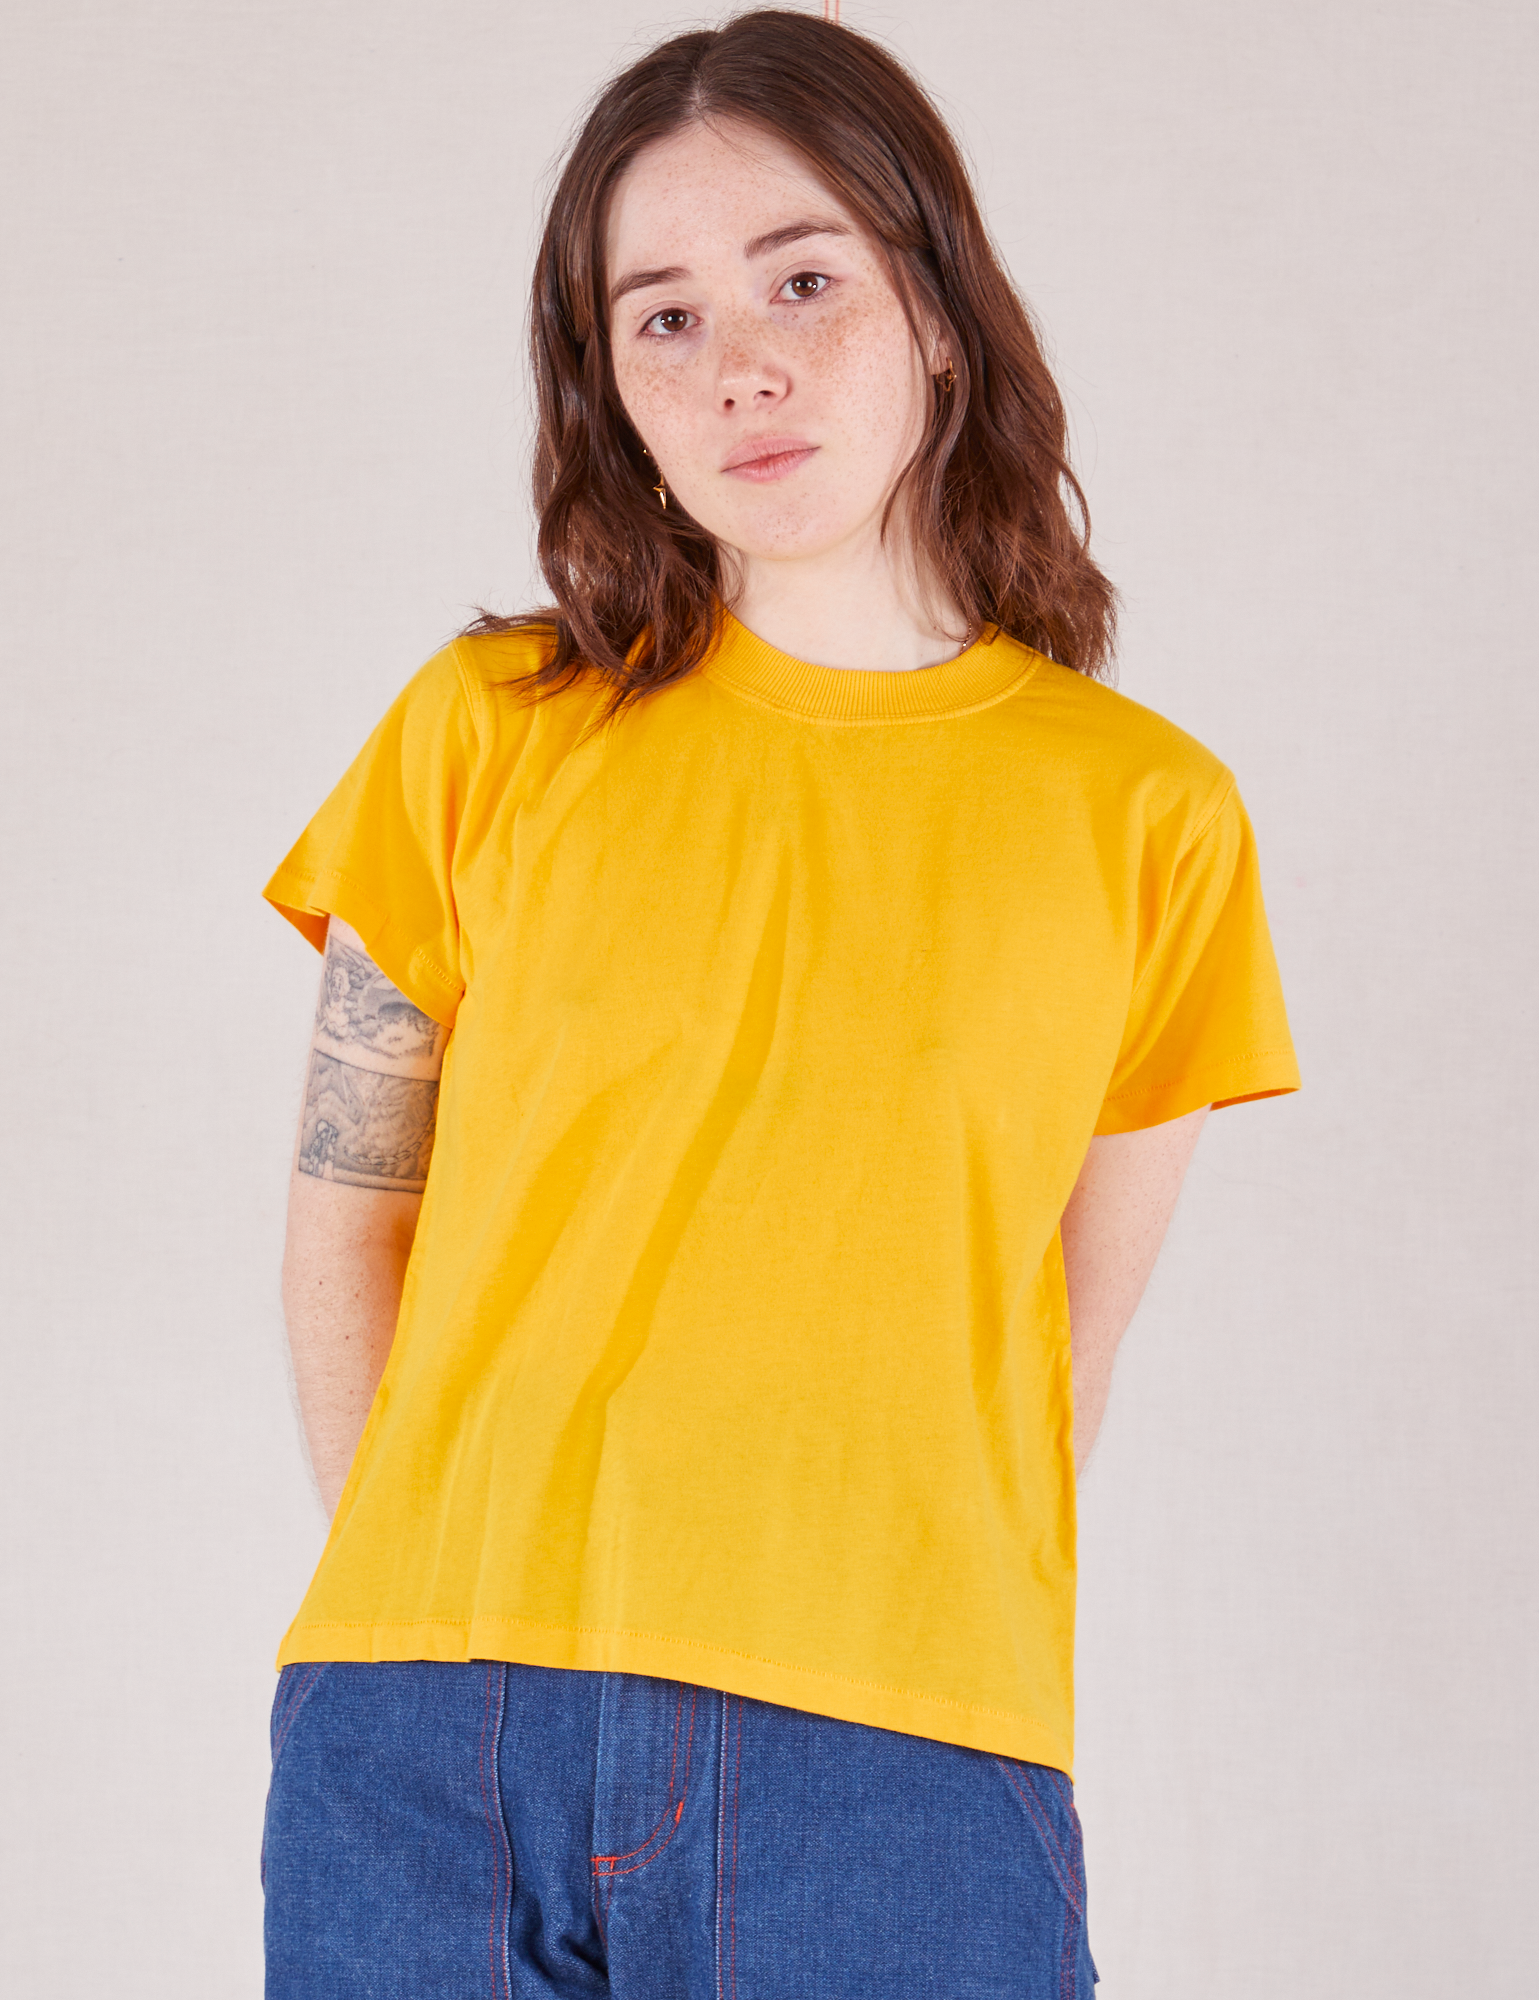 Hana is 5&#39;3&quot; and wearing P Organic Vintage Tee in Sunshine Yellow